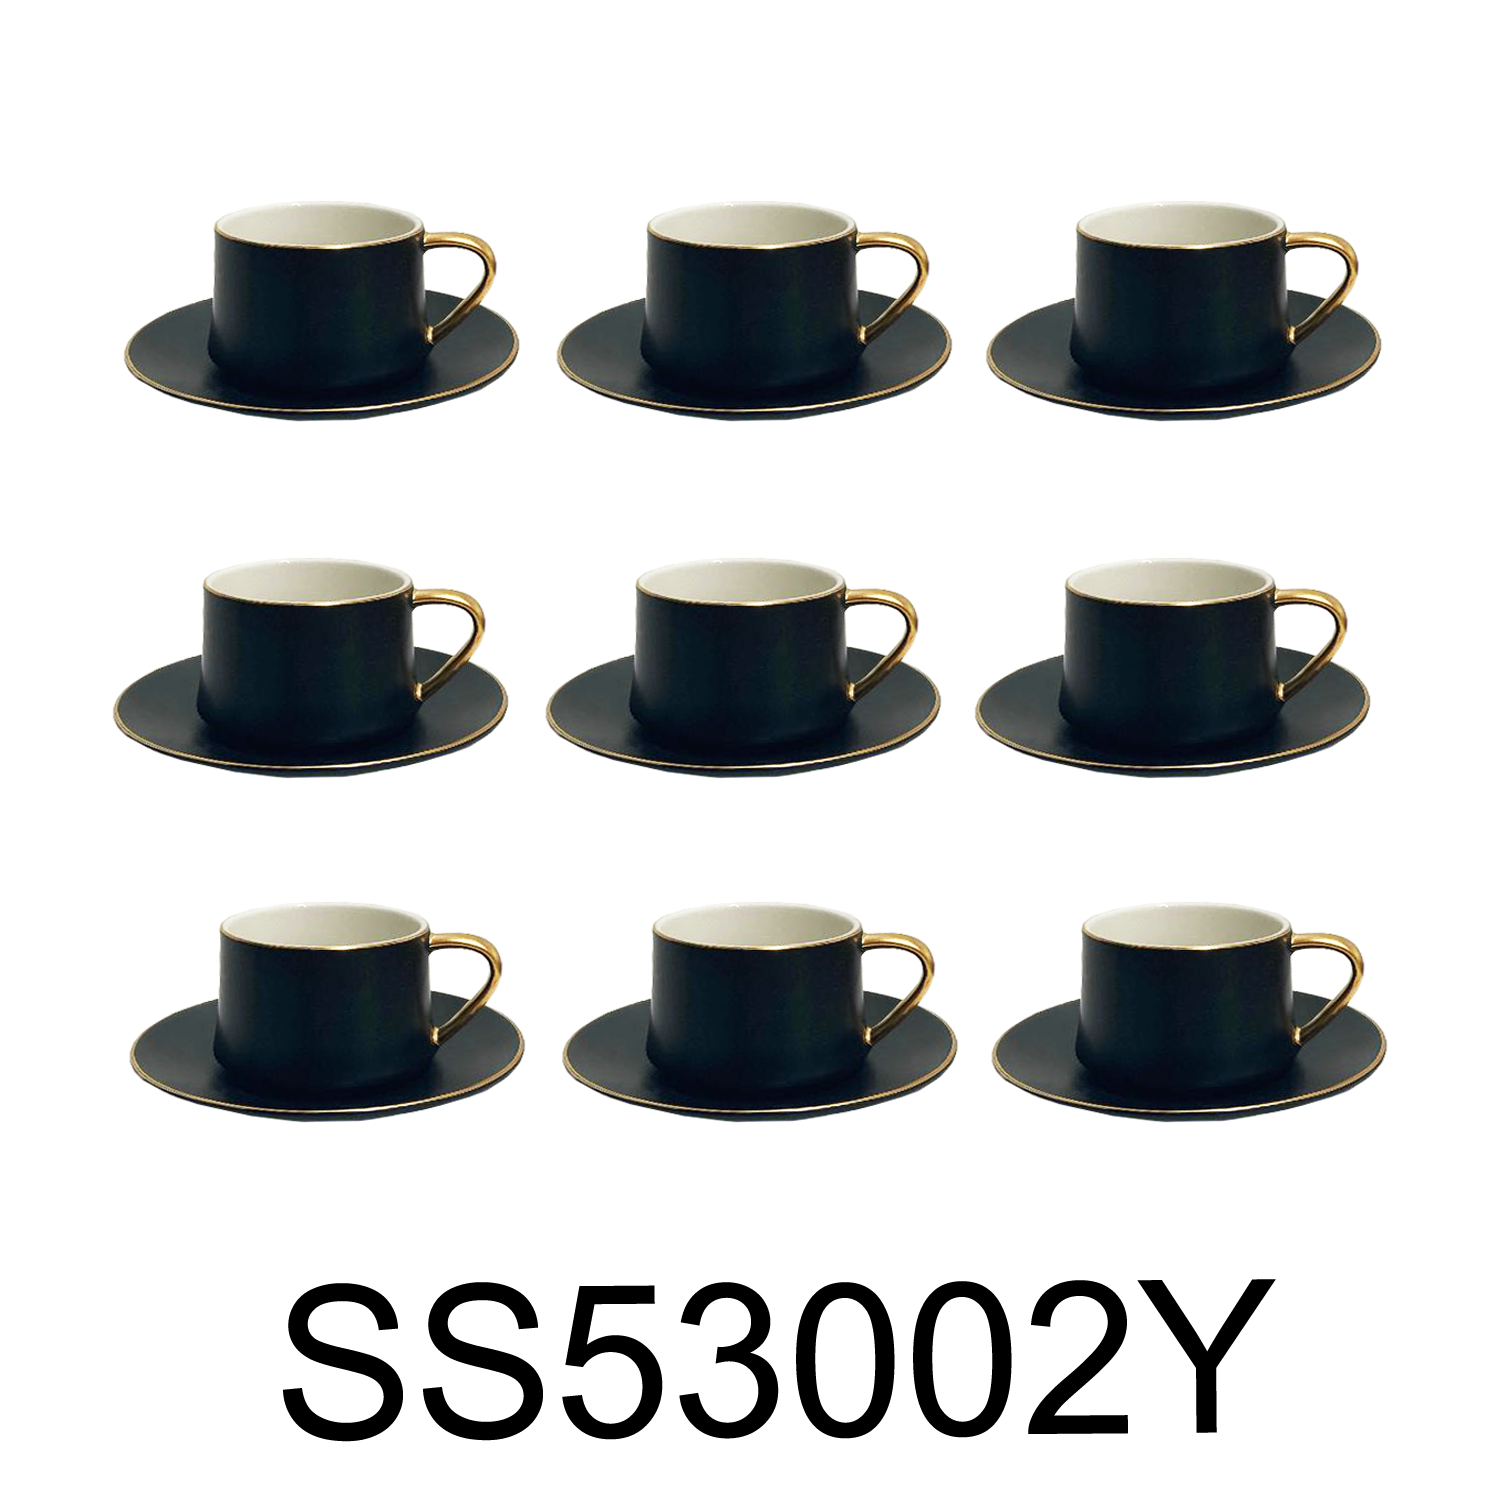 6x Porcelain Espresso Cups and Saucers Set, Turkish Coffee Cup Set